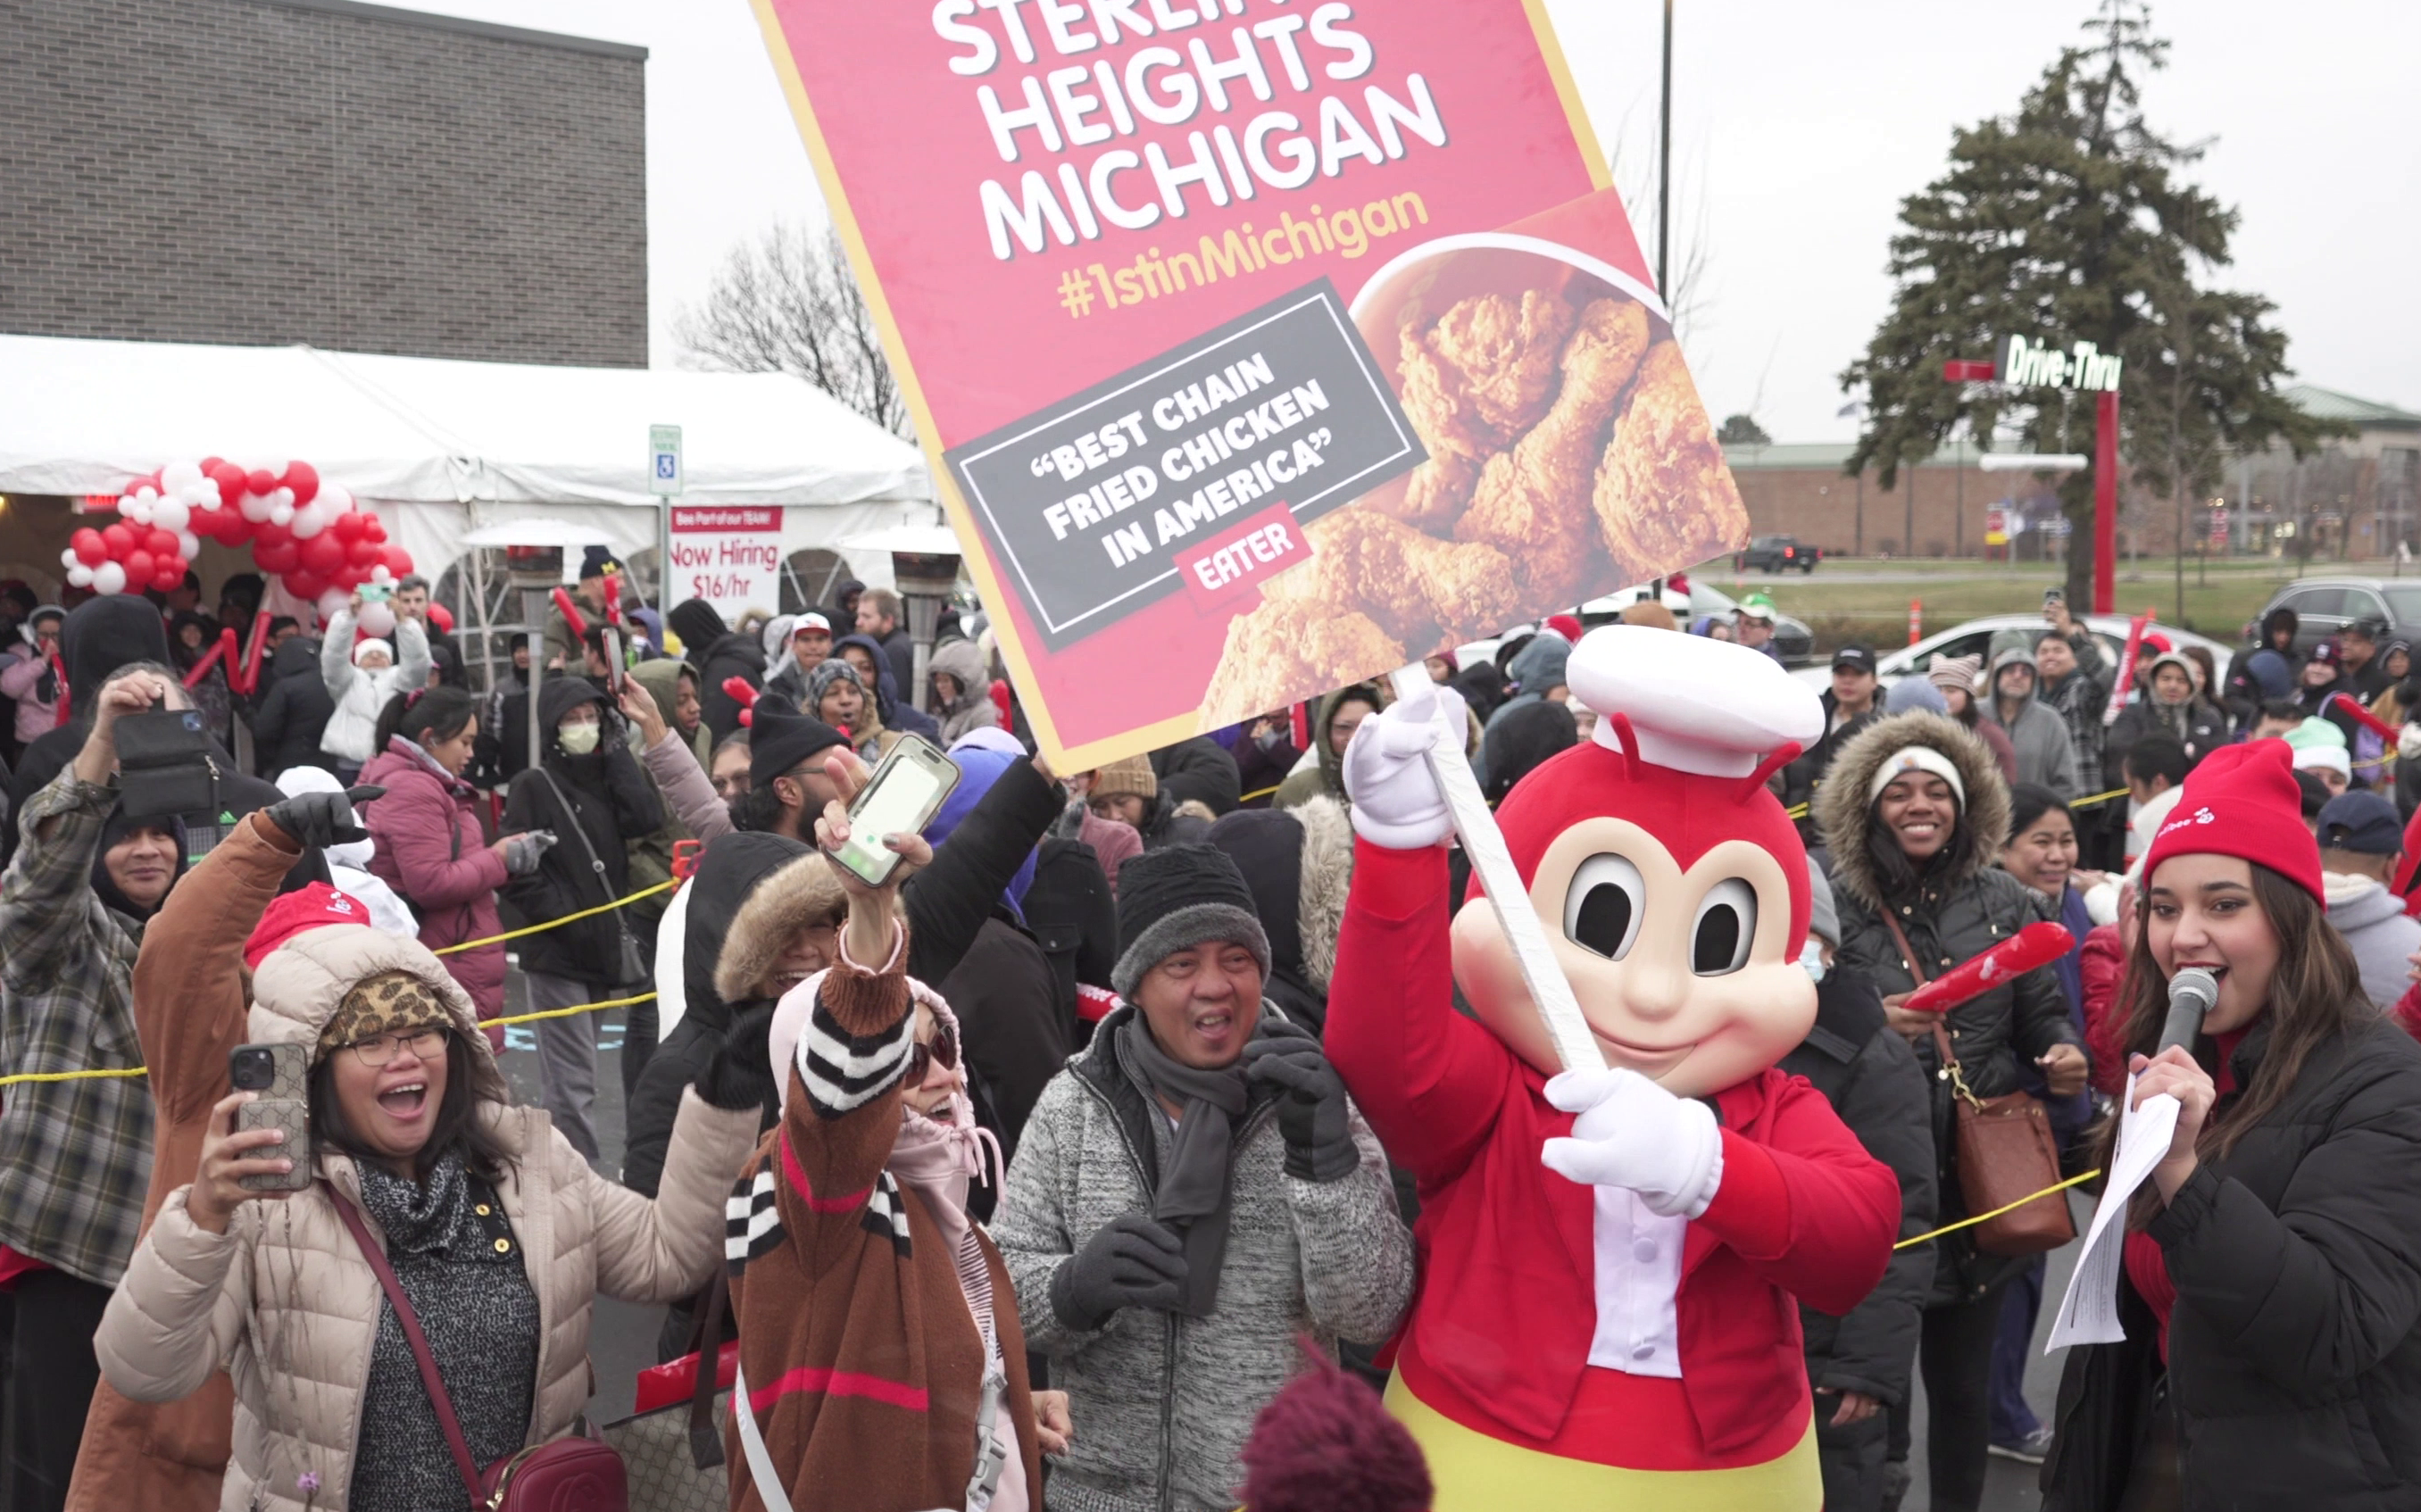 Jollibee USA Opens First Store in the State of Michigan, USA